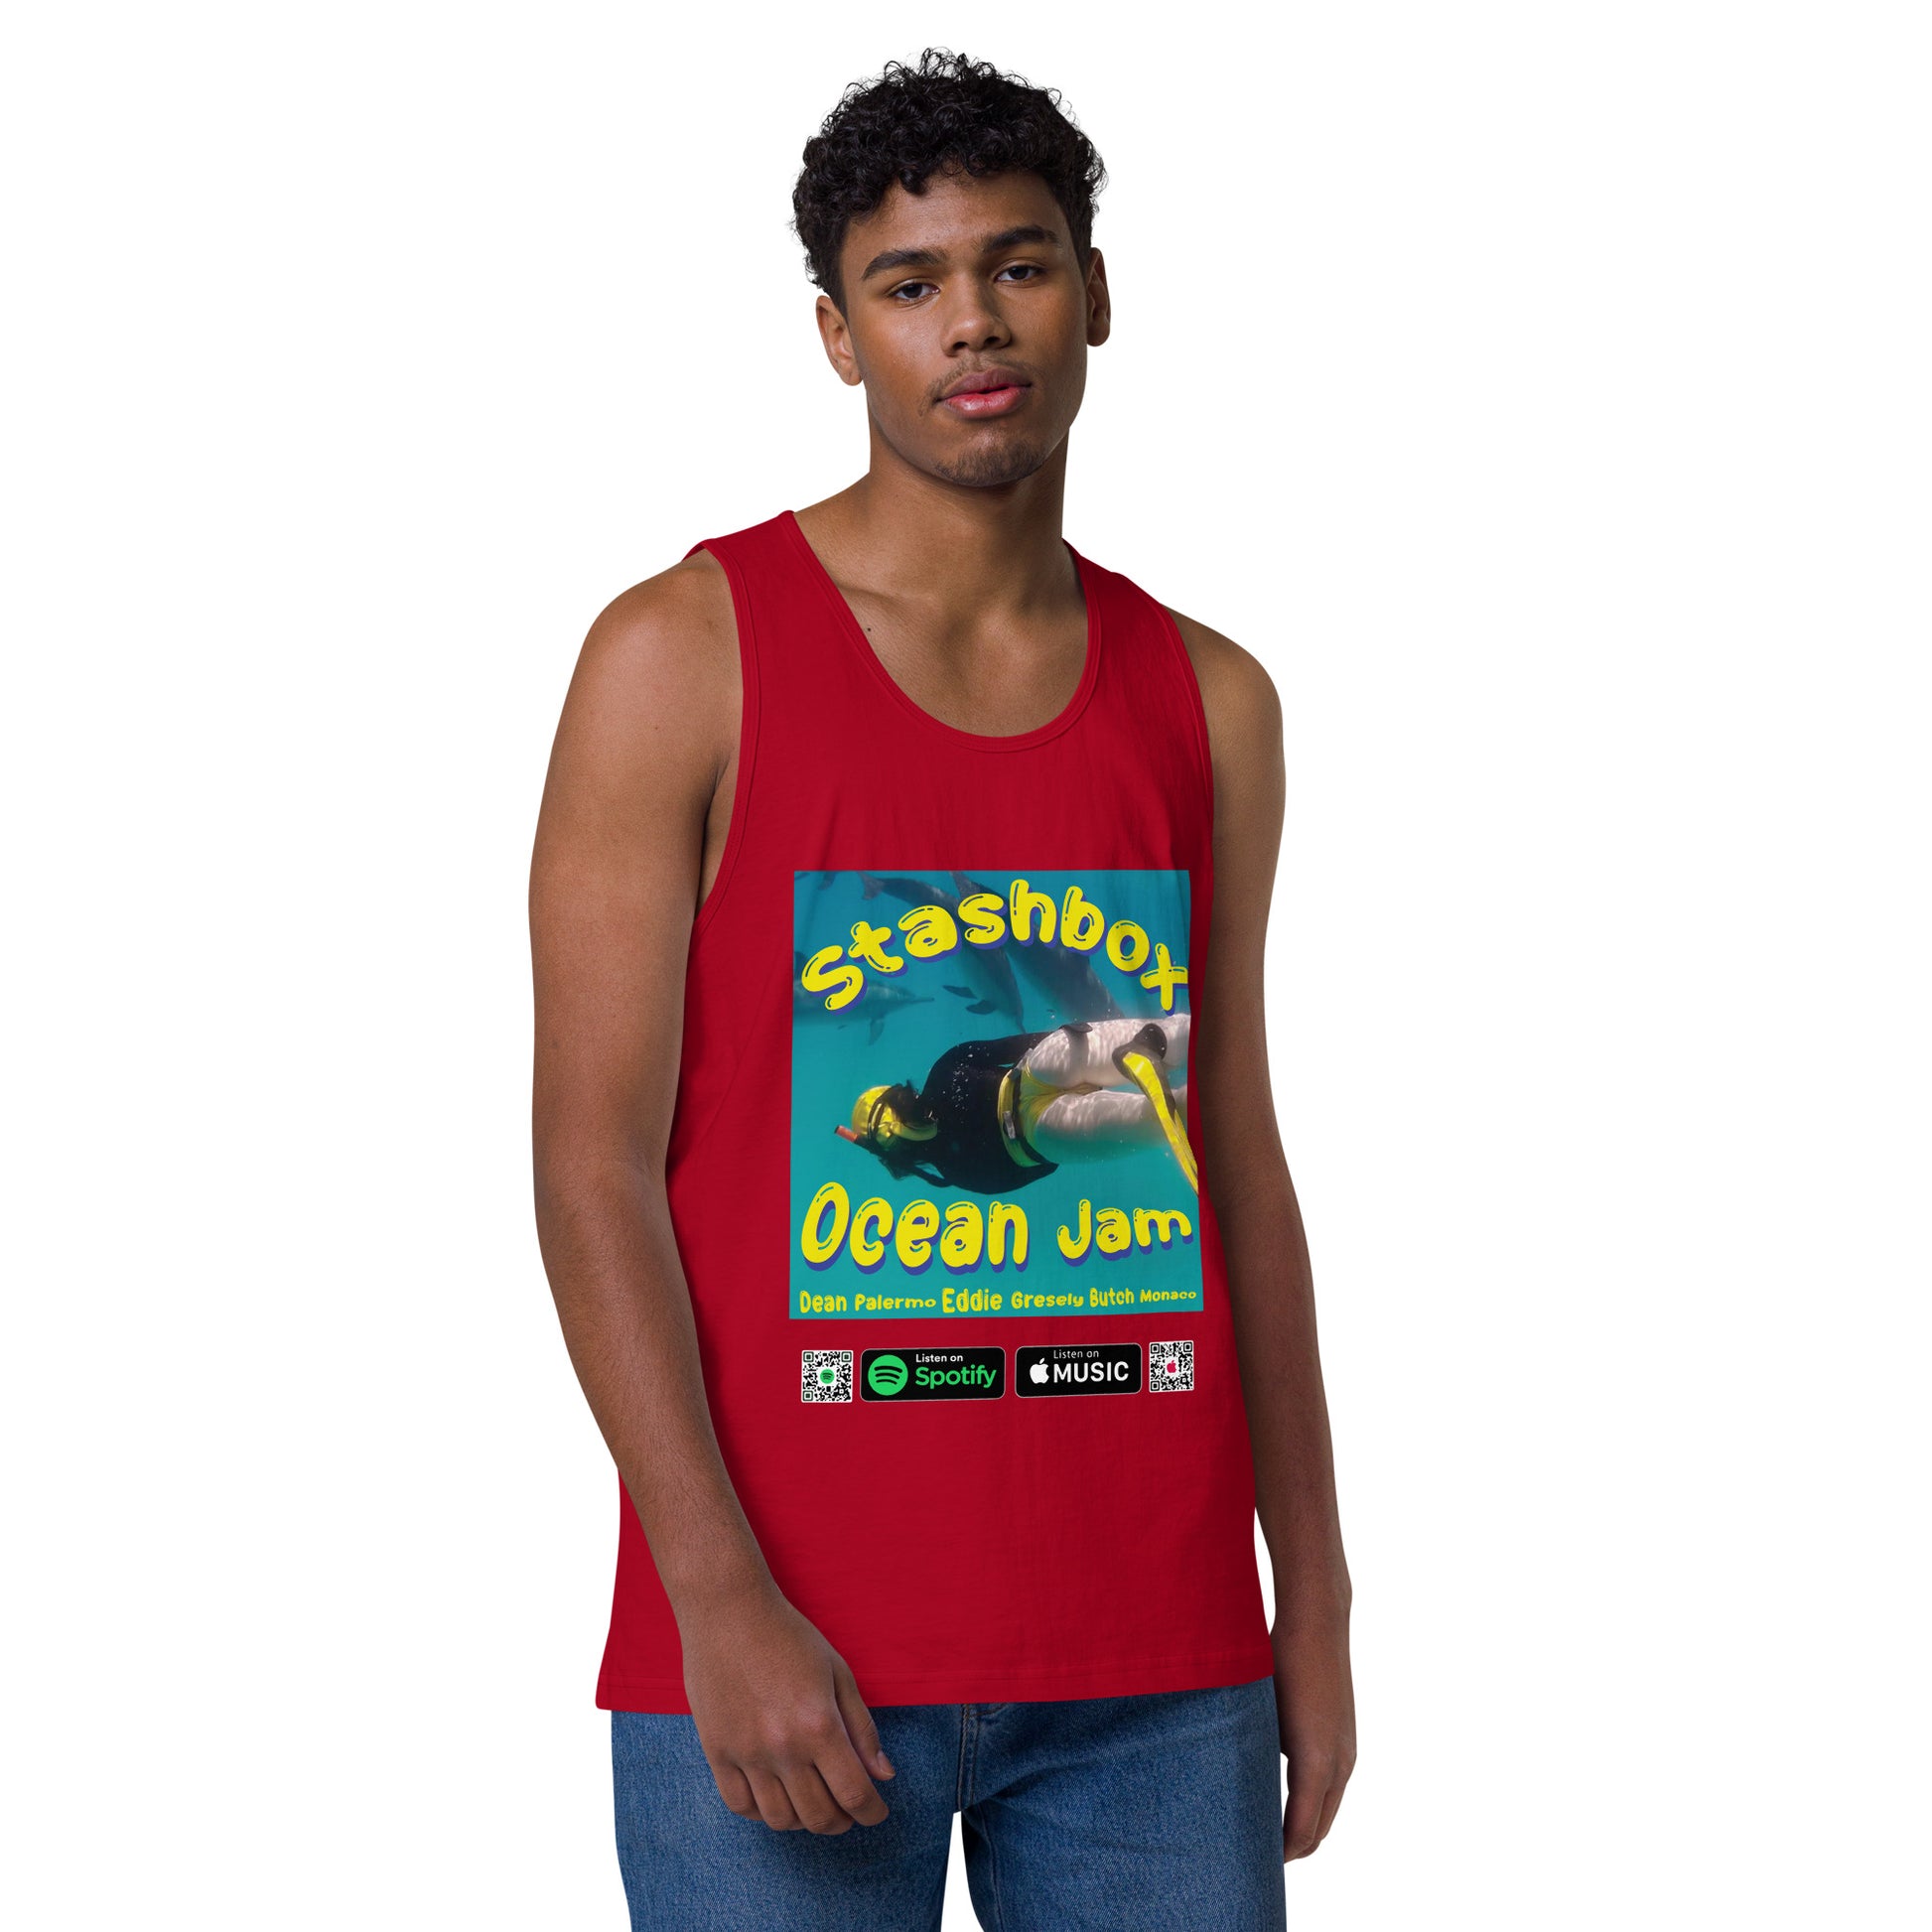 Dive into musical vibes with our Ocean Jam Men’s Premium Tank Top, Design #017. Your fashion, your gateway to musical expression, exclusively at Stashbox.ai.